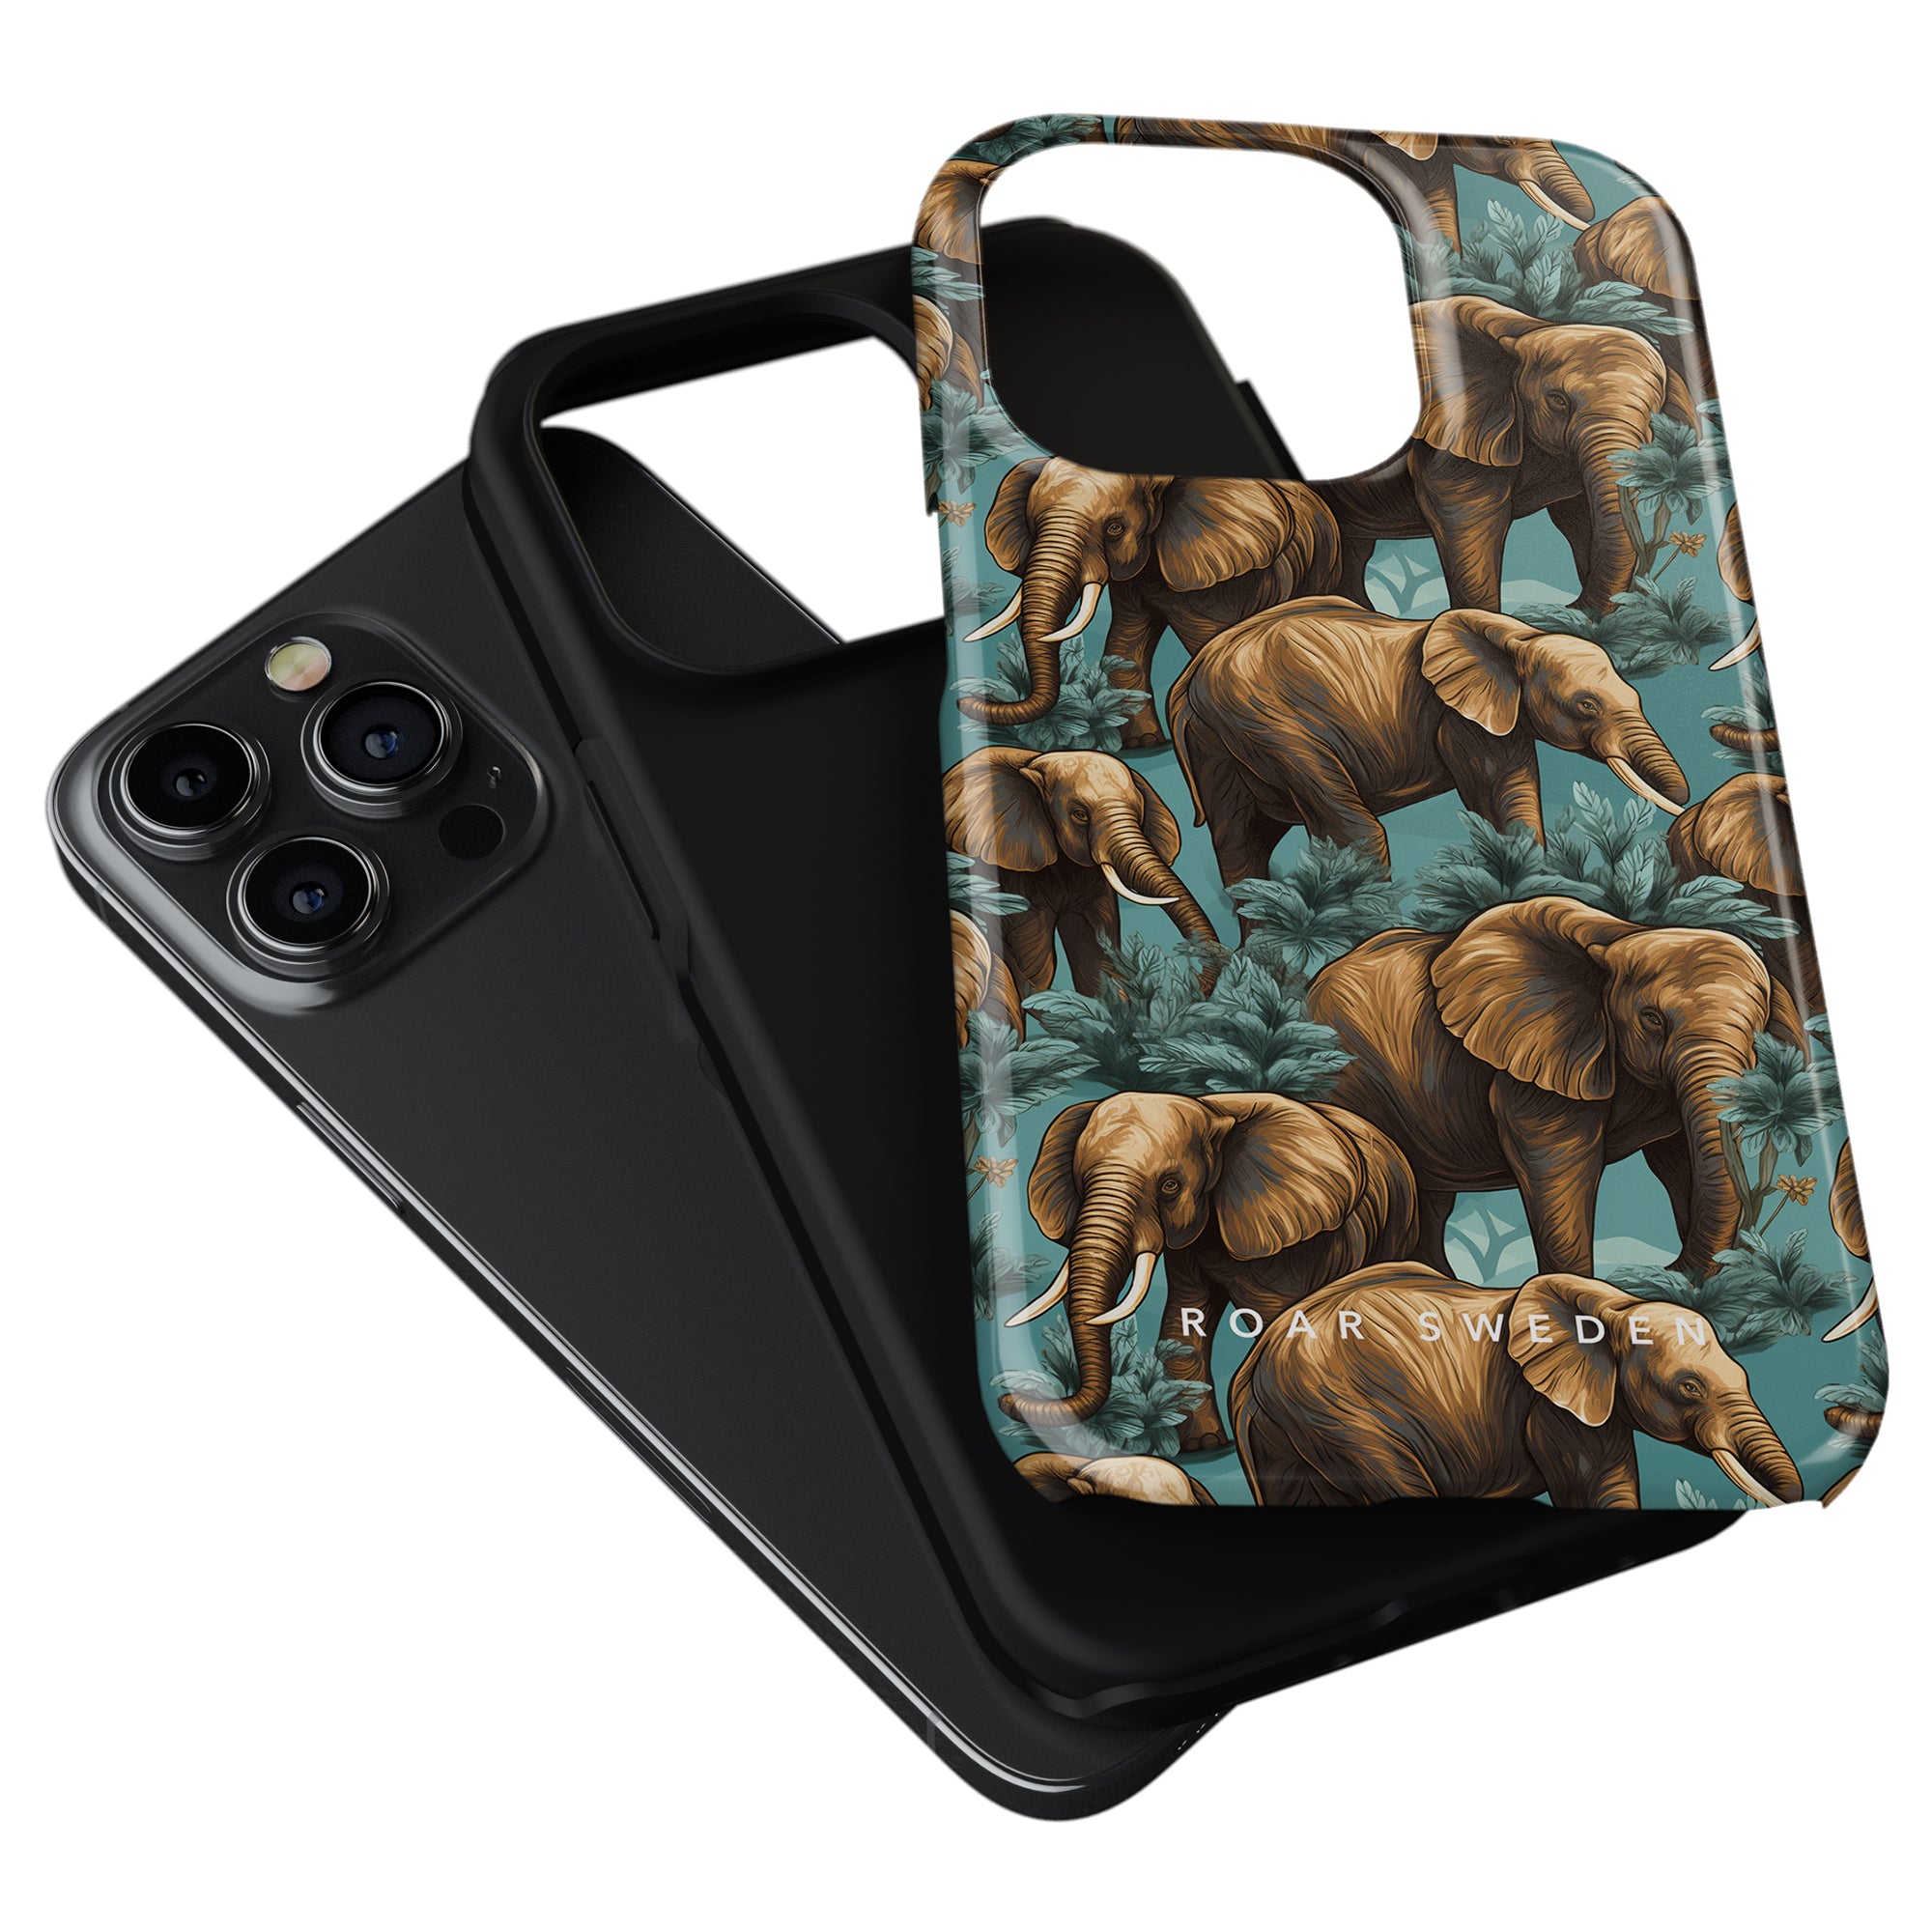 Two phone cases from the Safari Collection, one plain black and one with an elephant design, placed next to a smartphone with a triple camera setup. The Hathi - Tough Case showcases the intricate elefanter pattern beautifully.